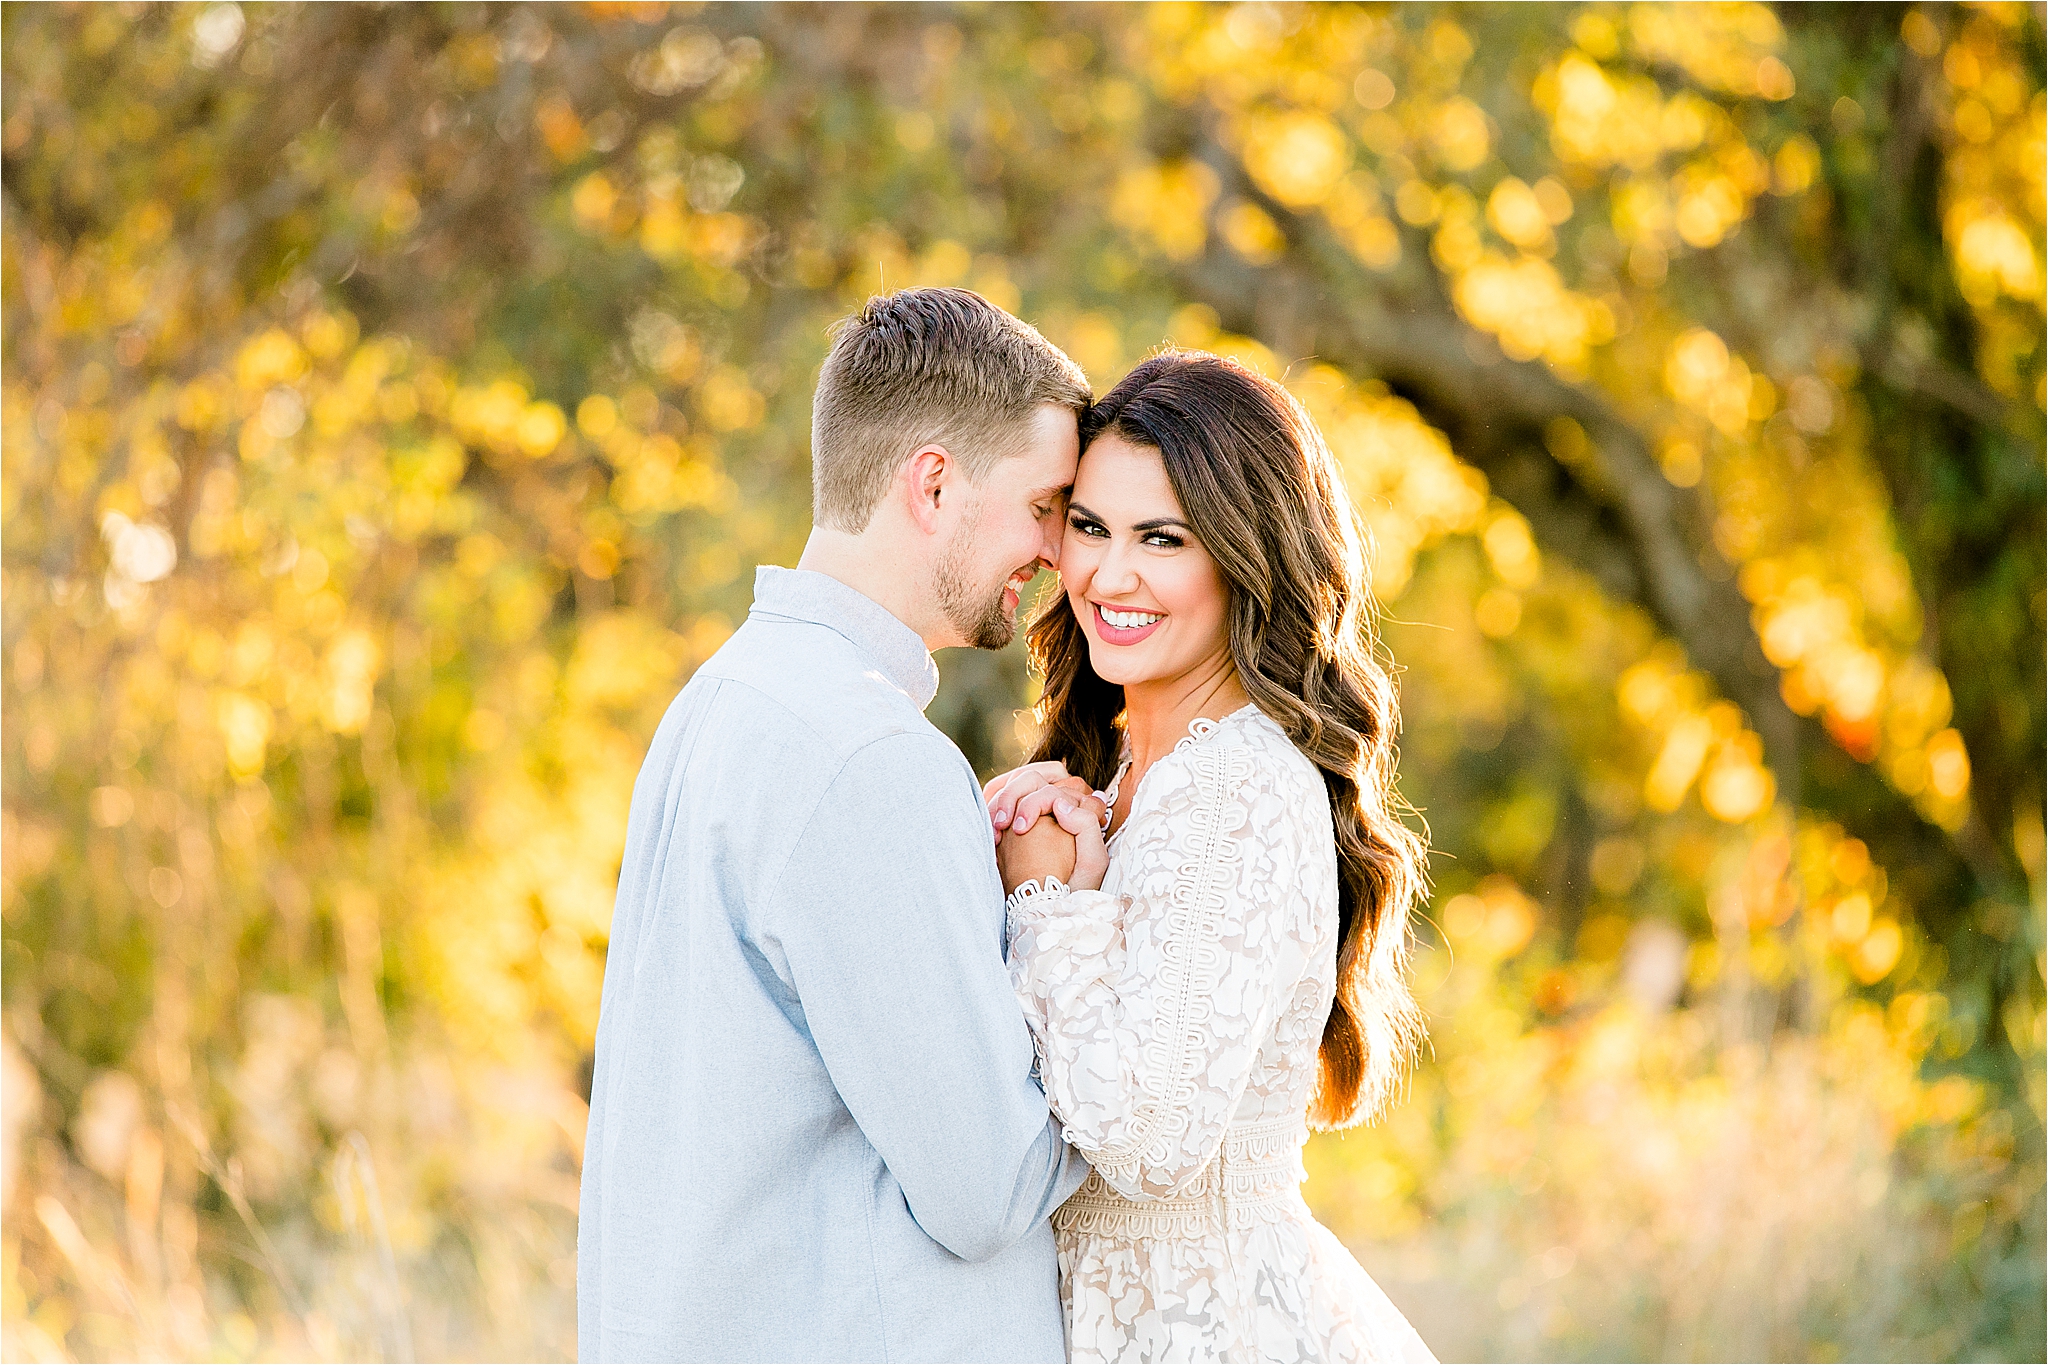 Miss Texas 2018 smiles while embracing her fiance during their golden hour engagement session by Dallas Engagement Photographer Jillian Hogan 